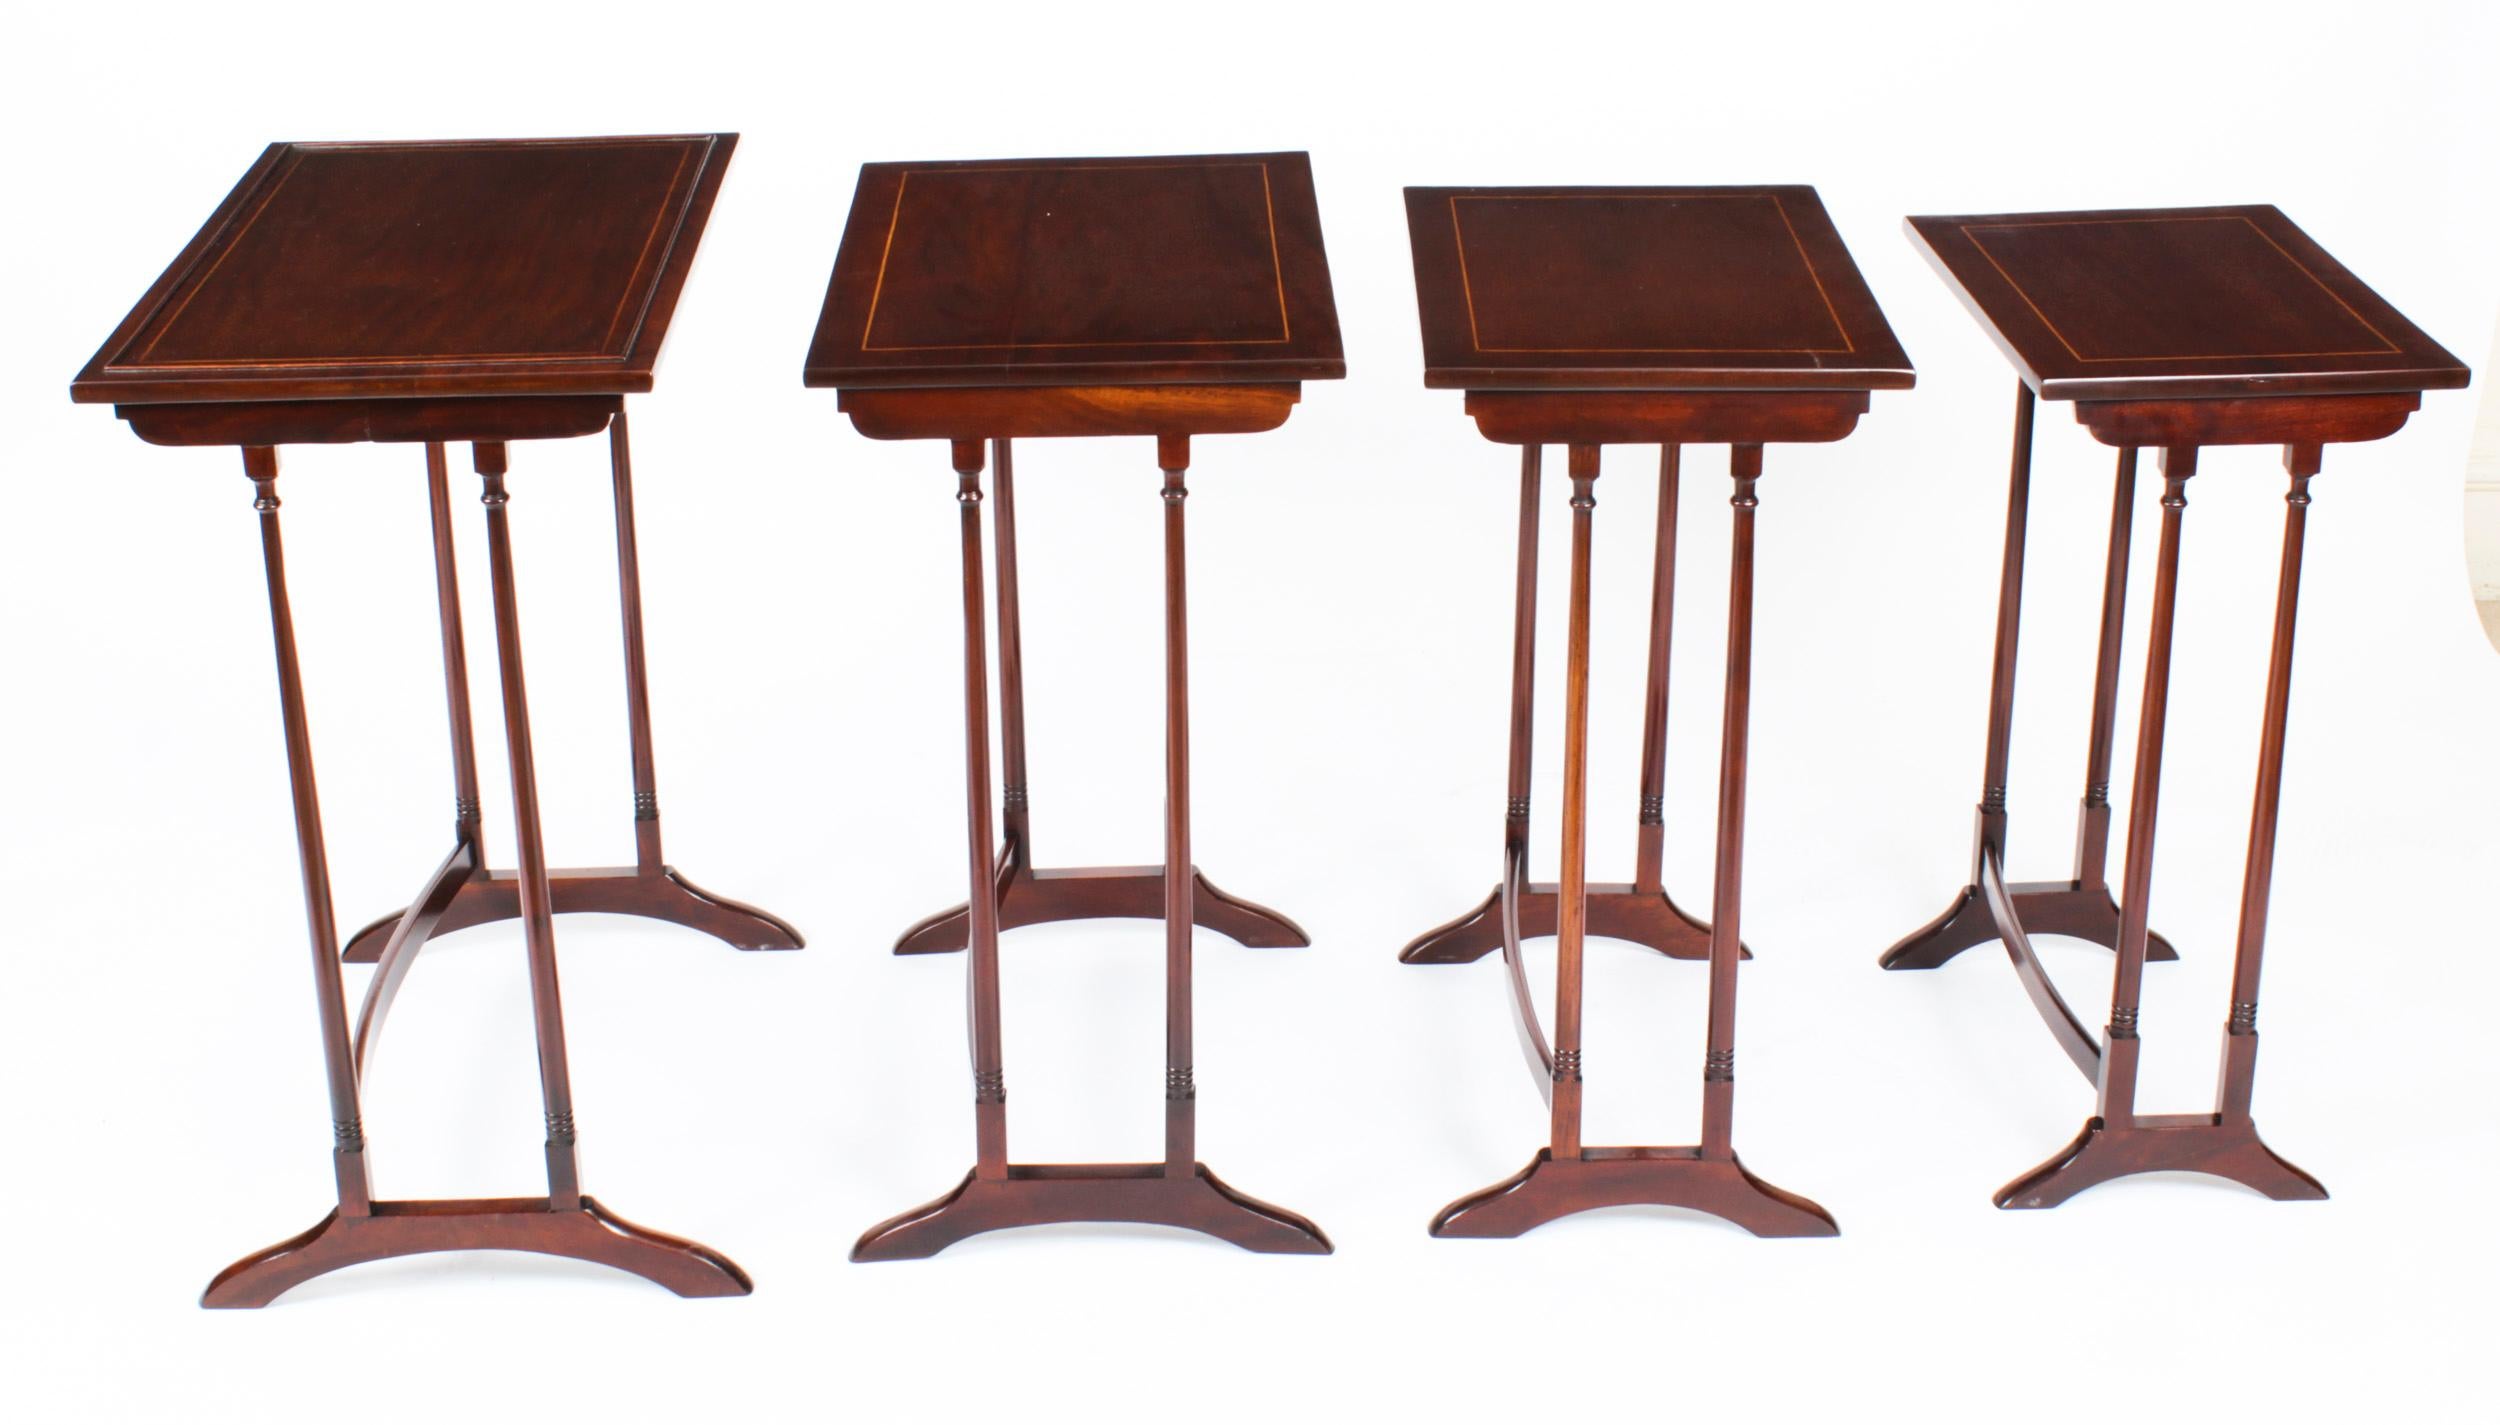 English Antique Edwardian Mahogany Nest of Four Tables Early 20th Century For Sale